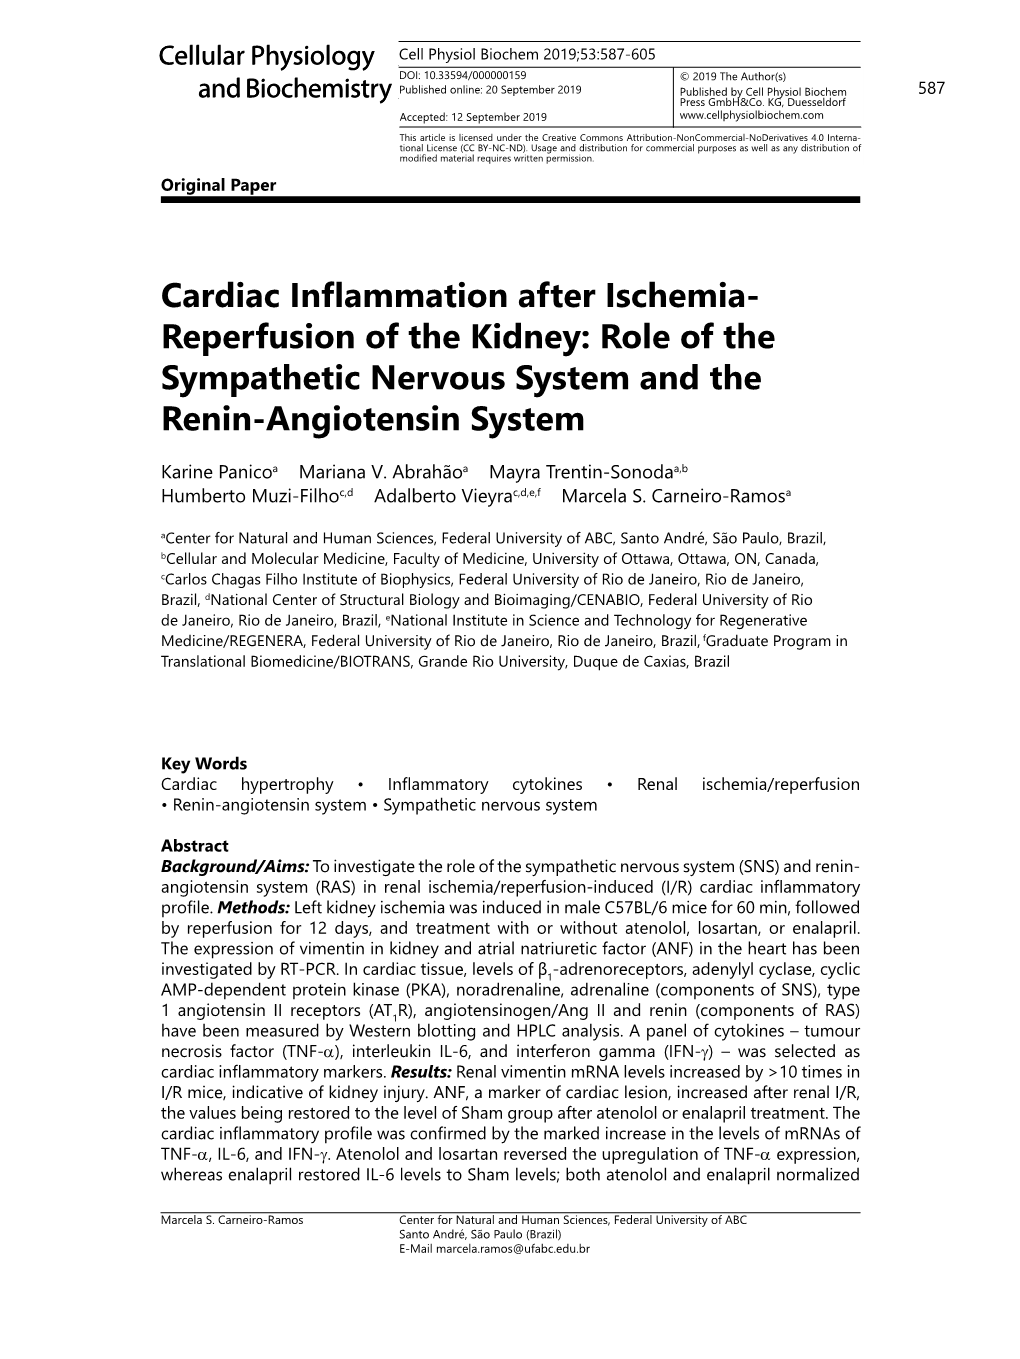 Cardiac Inflammation After Ischemia- Reperfusion of the Kidney: Role of the Sympathetic Nervous System and the Renin-Angiotensin System